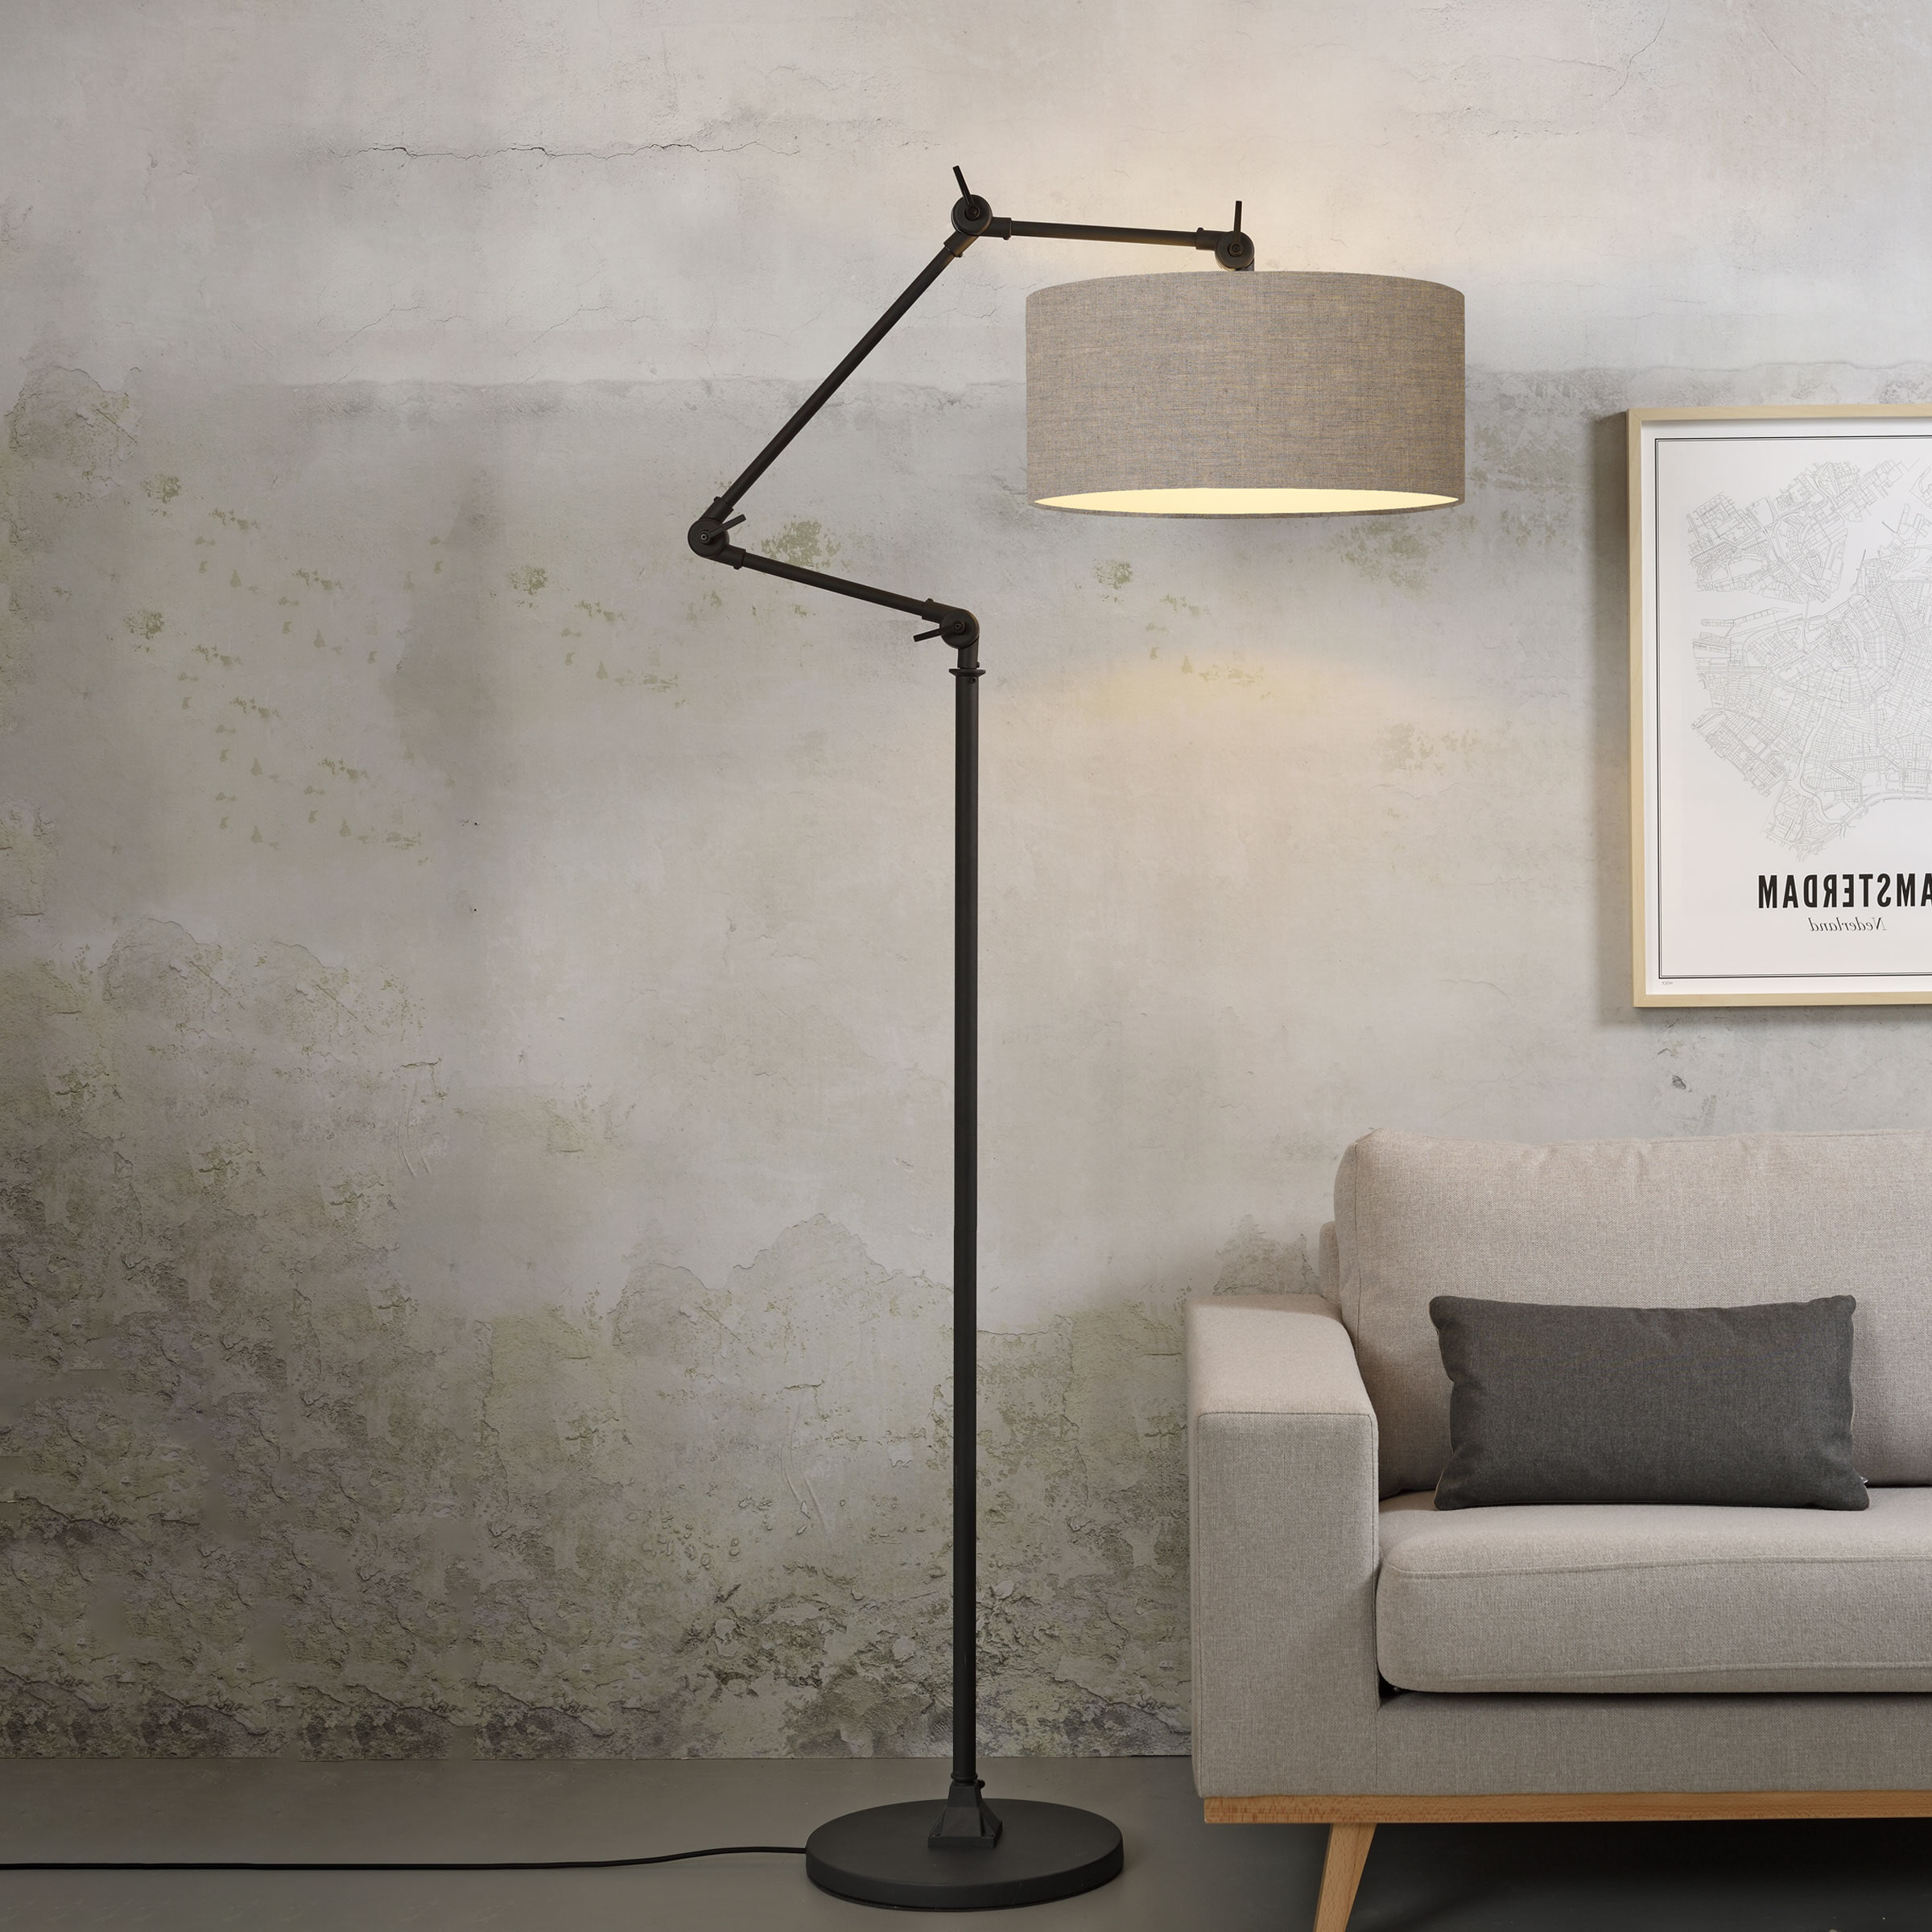 its about RoMi Vloerlamp Amsterdam 190cm